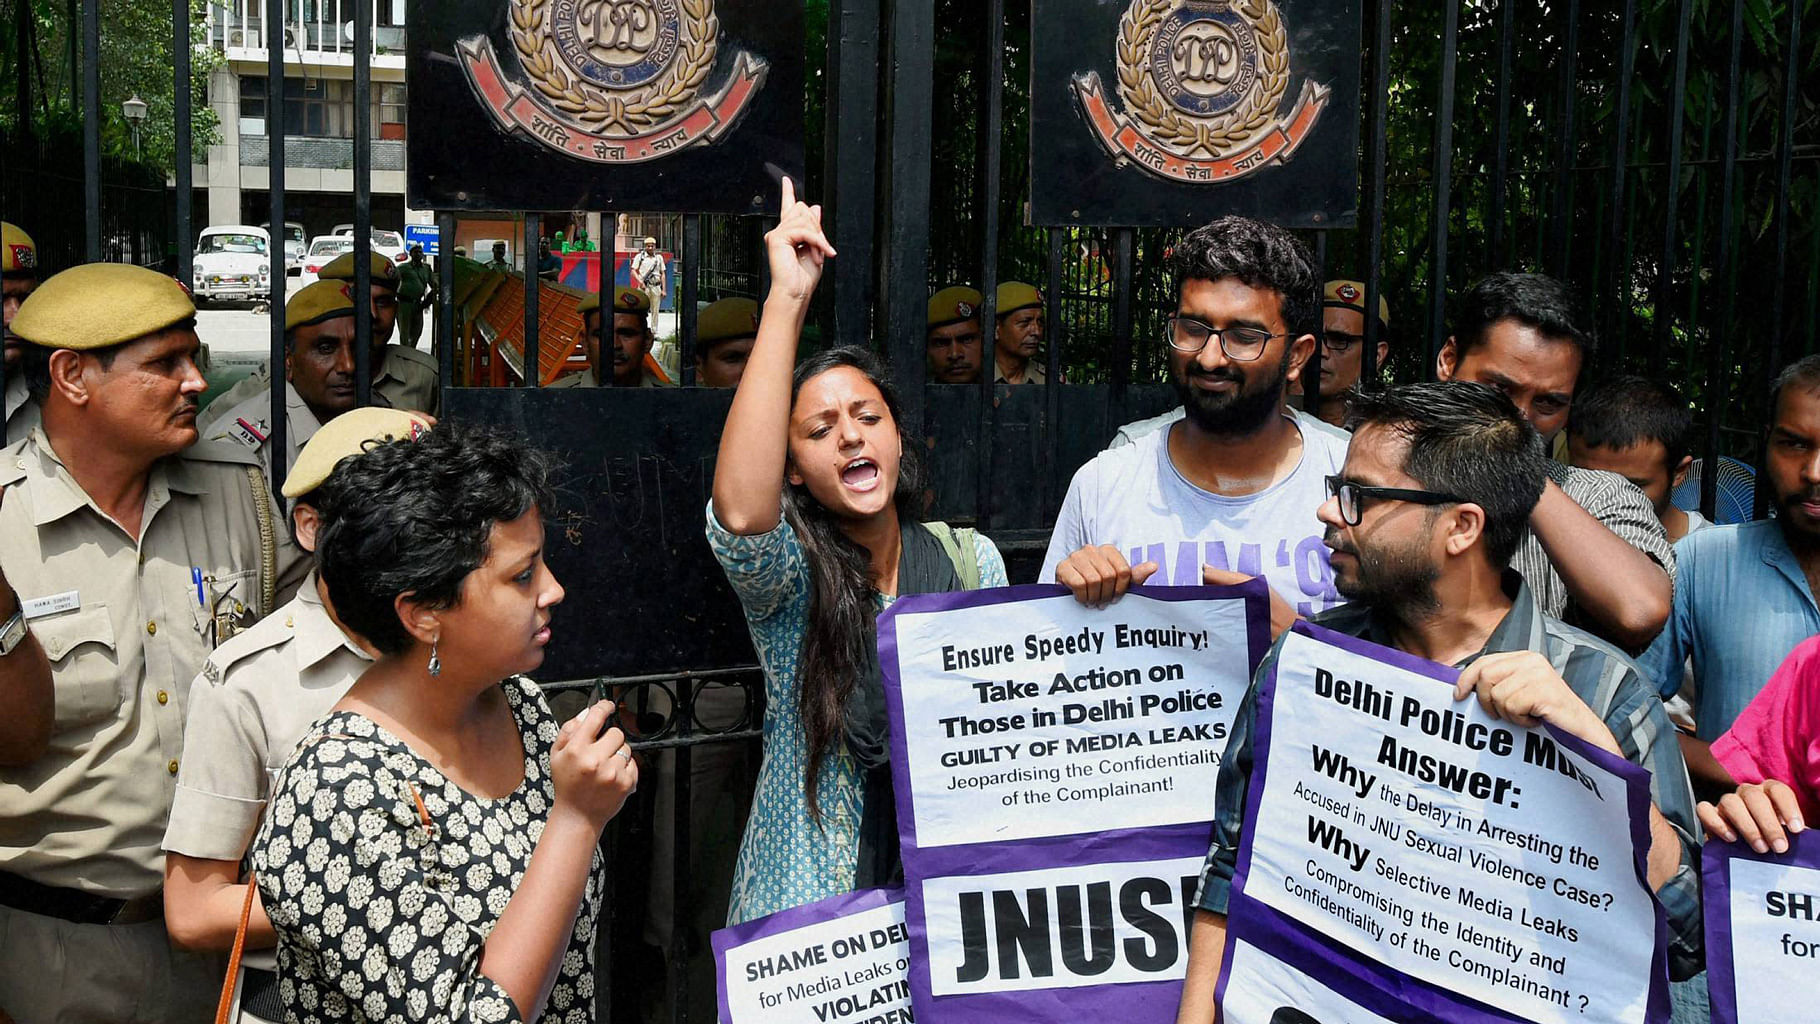 File image of JNU students protesting. Image used for representational purpose only.